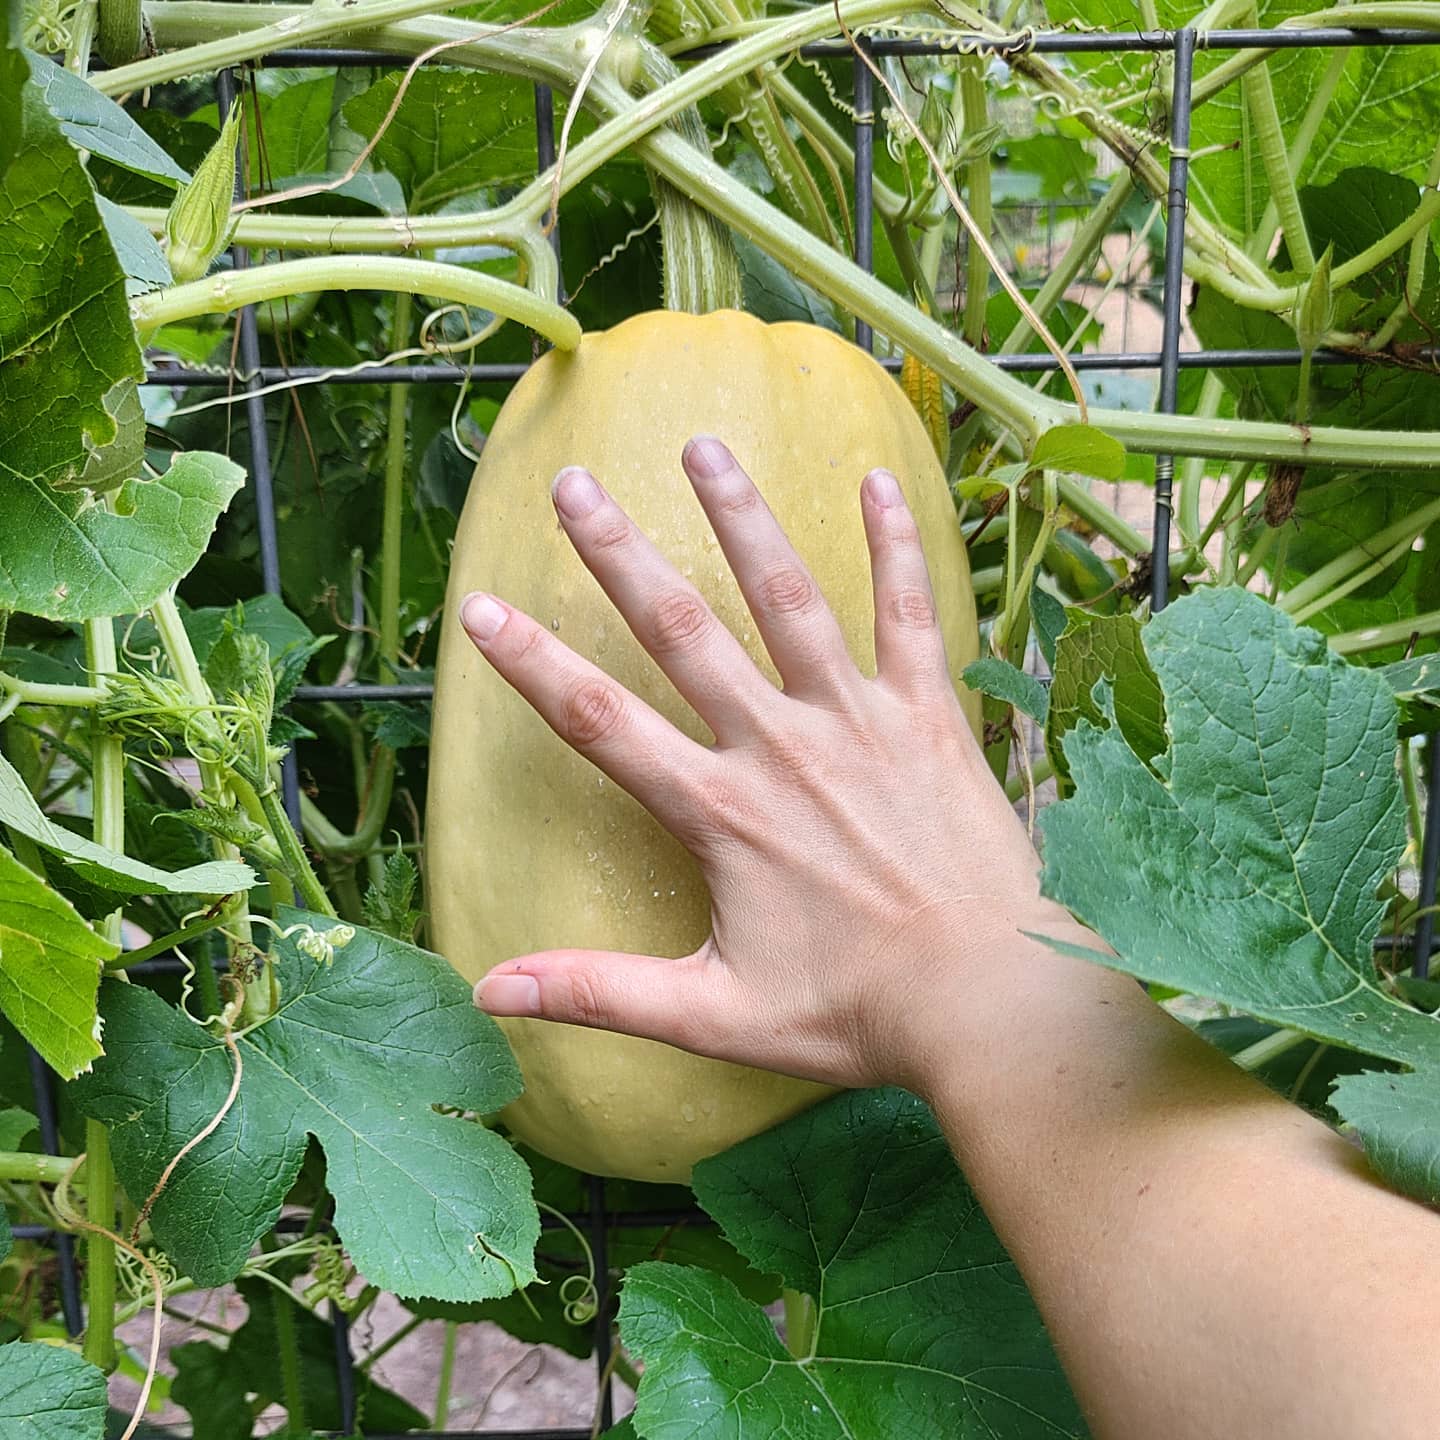 I cannot overstate the giantness of this #spagettisquash! It's starting to turn yellow and harden up. I hope it makes it to harvest!